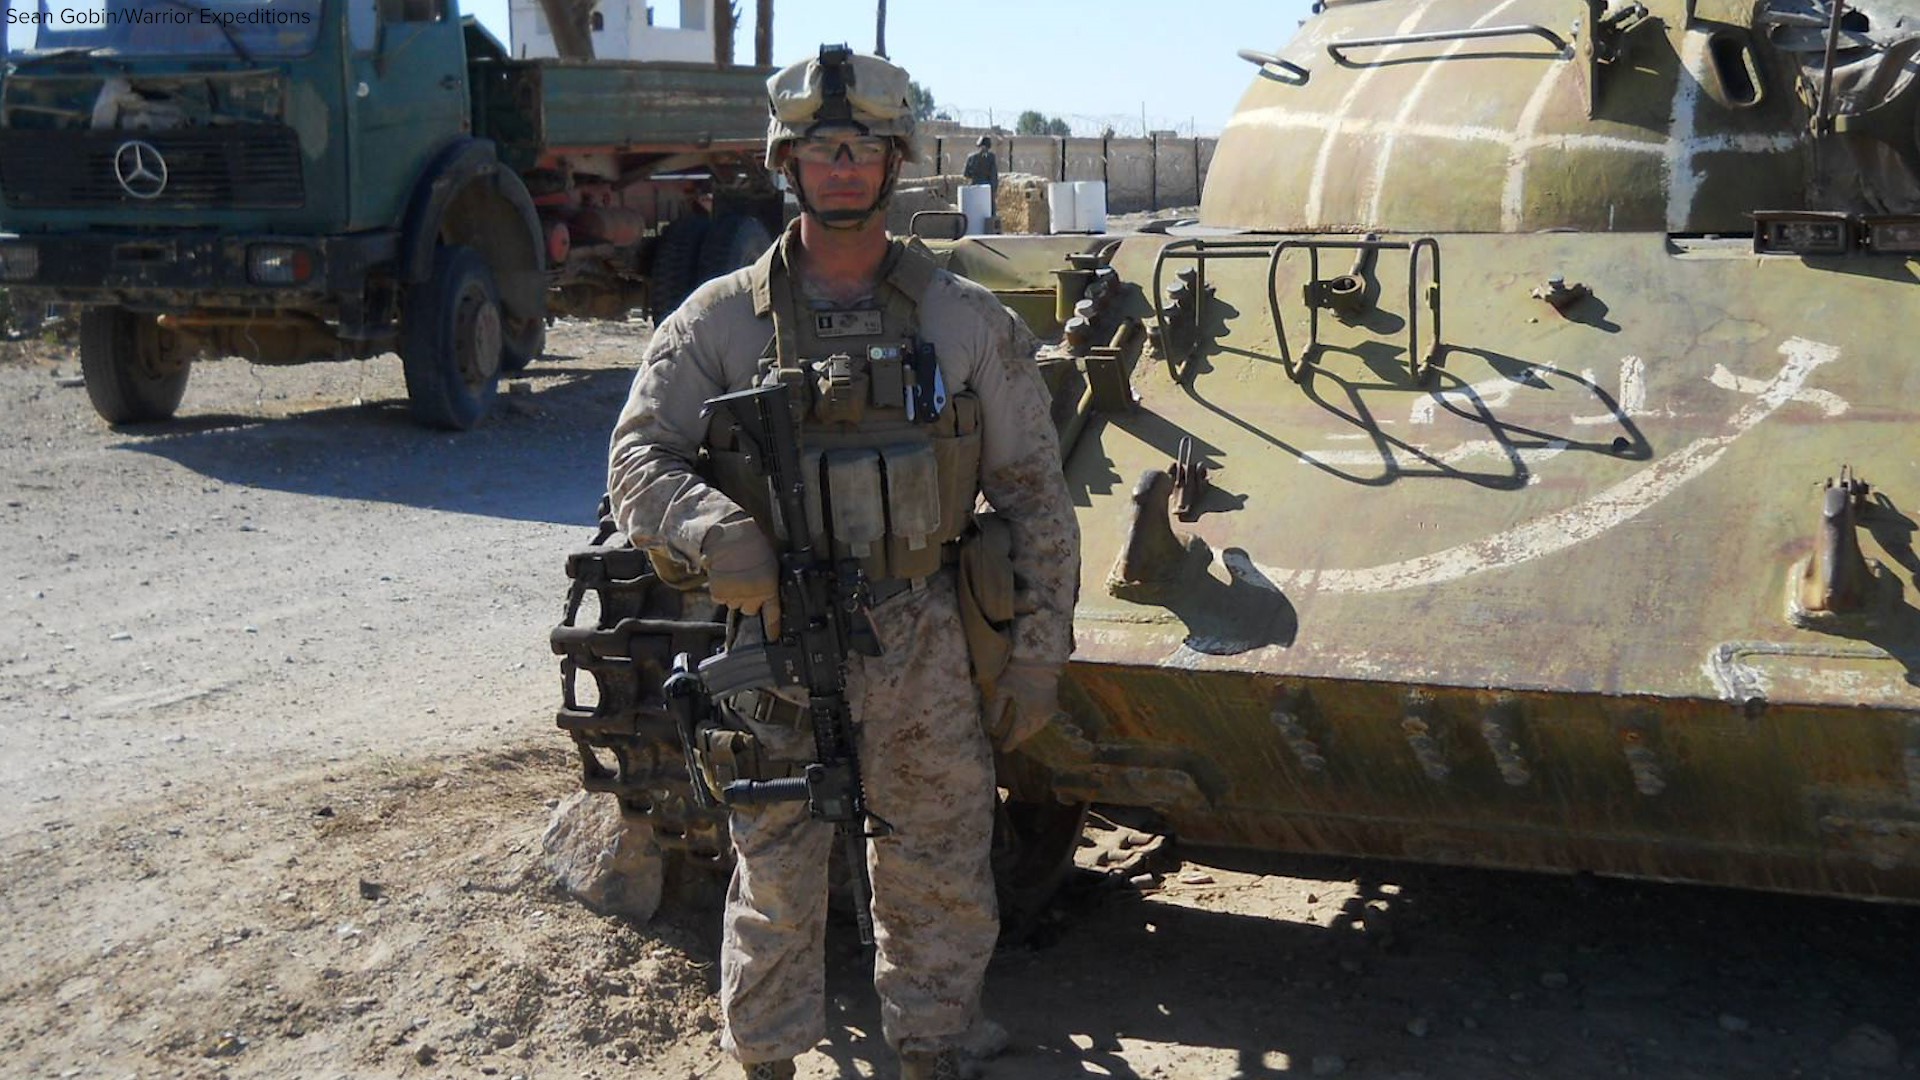 After three deployments to combat zones, Sean Gobin decided to heal by hiking.